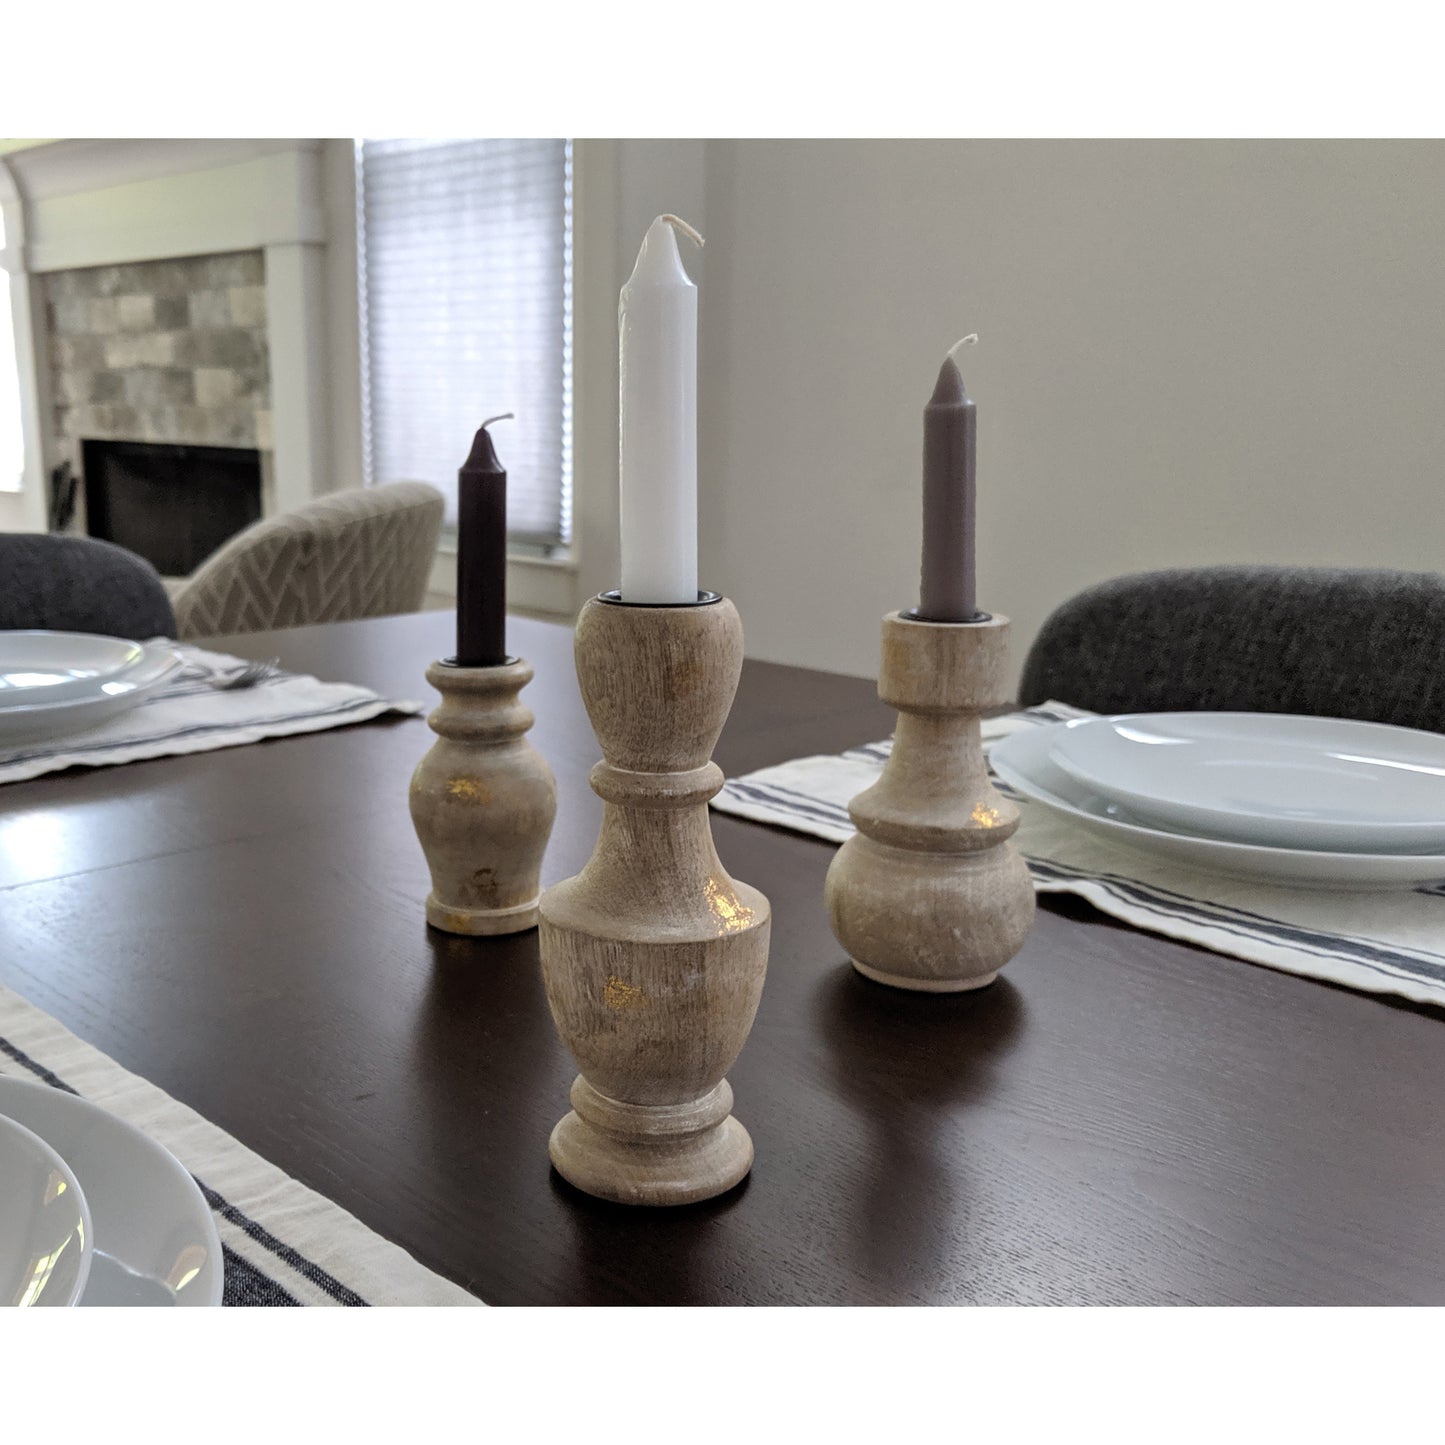 Image, white, grey and black candles in wooden candle holders, displayed on dinning table.